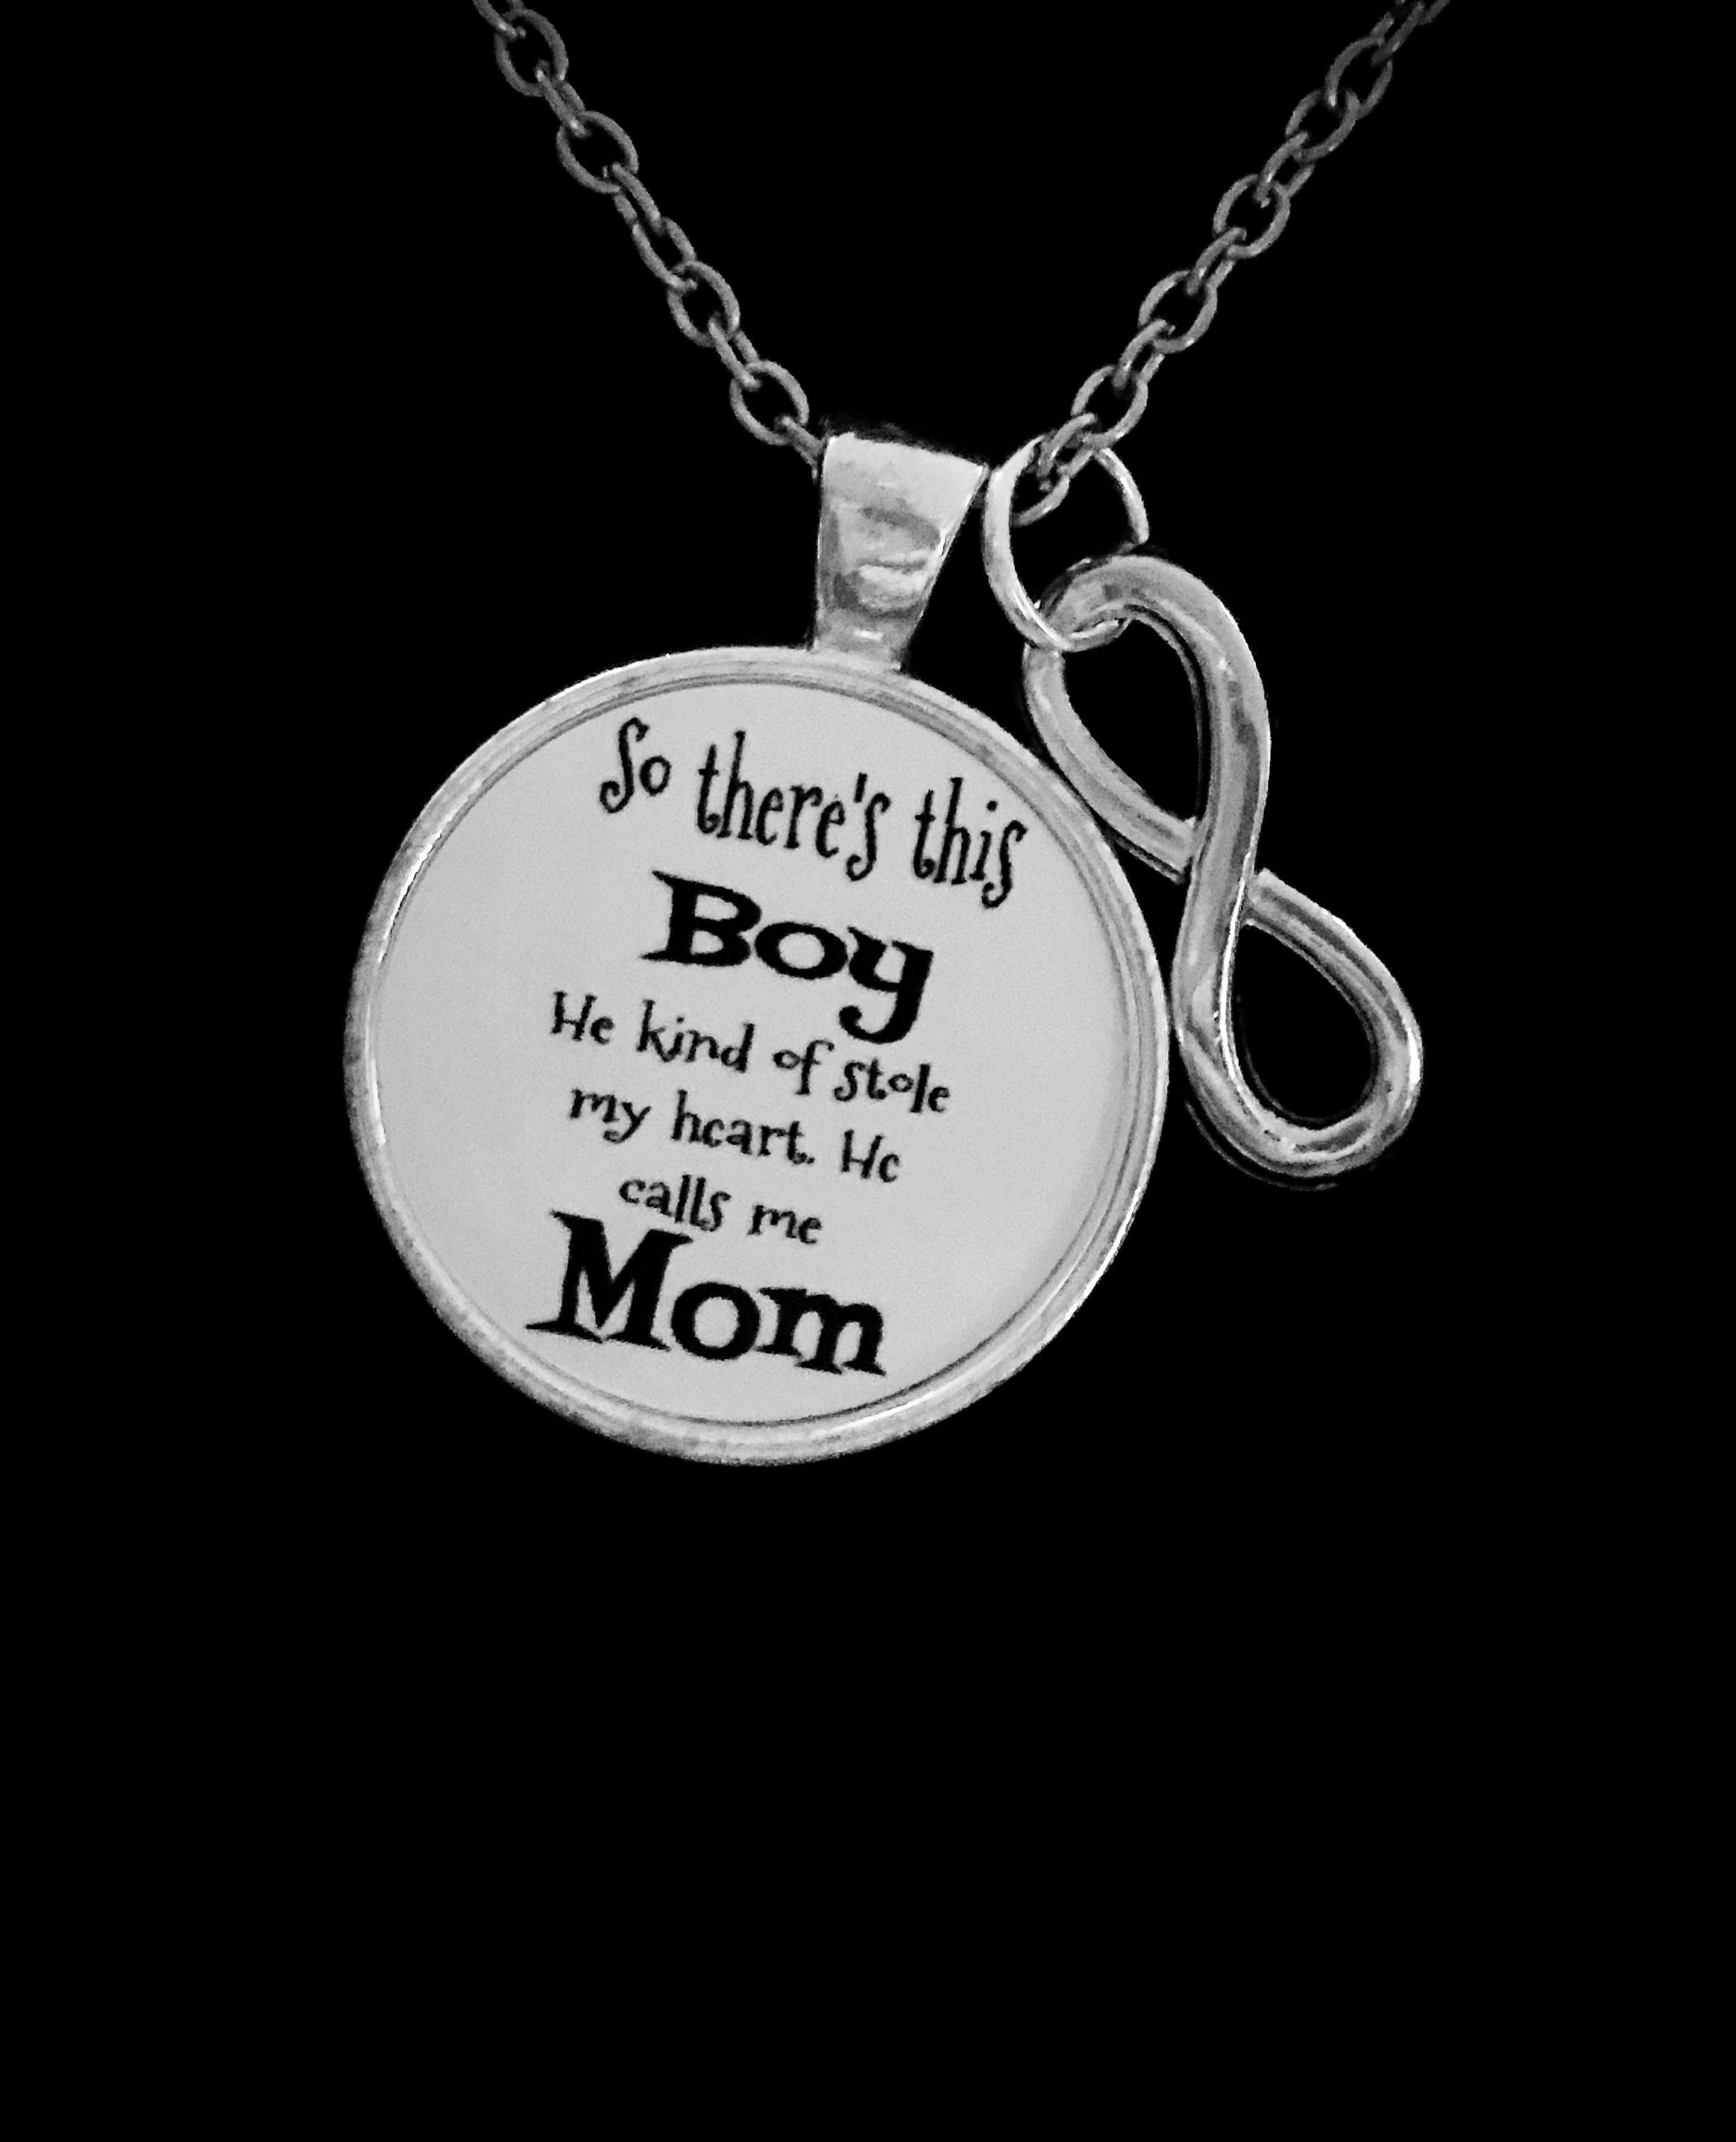 Boyfriend's Mom Necklace, Presents for Mother Gifts, Raise Boy Thank, Love  Knot Custom Dainty Chain Necklaces for Women, Mothers Day Jewelry Happy  Birthday Gift, Pendant Mother's Day Ideas for Her : Buy